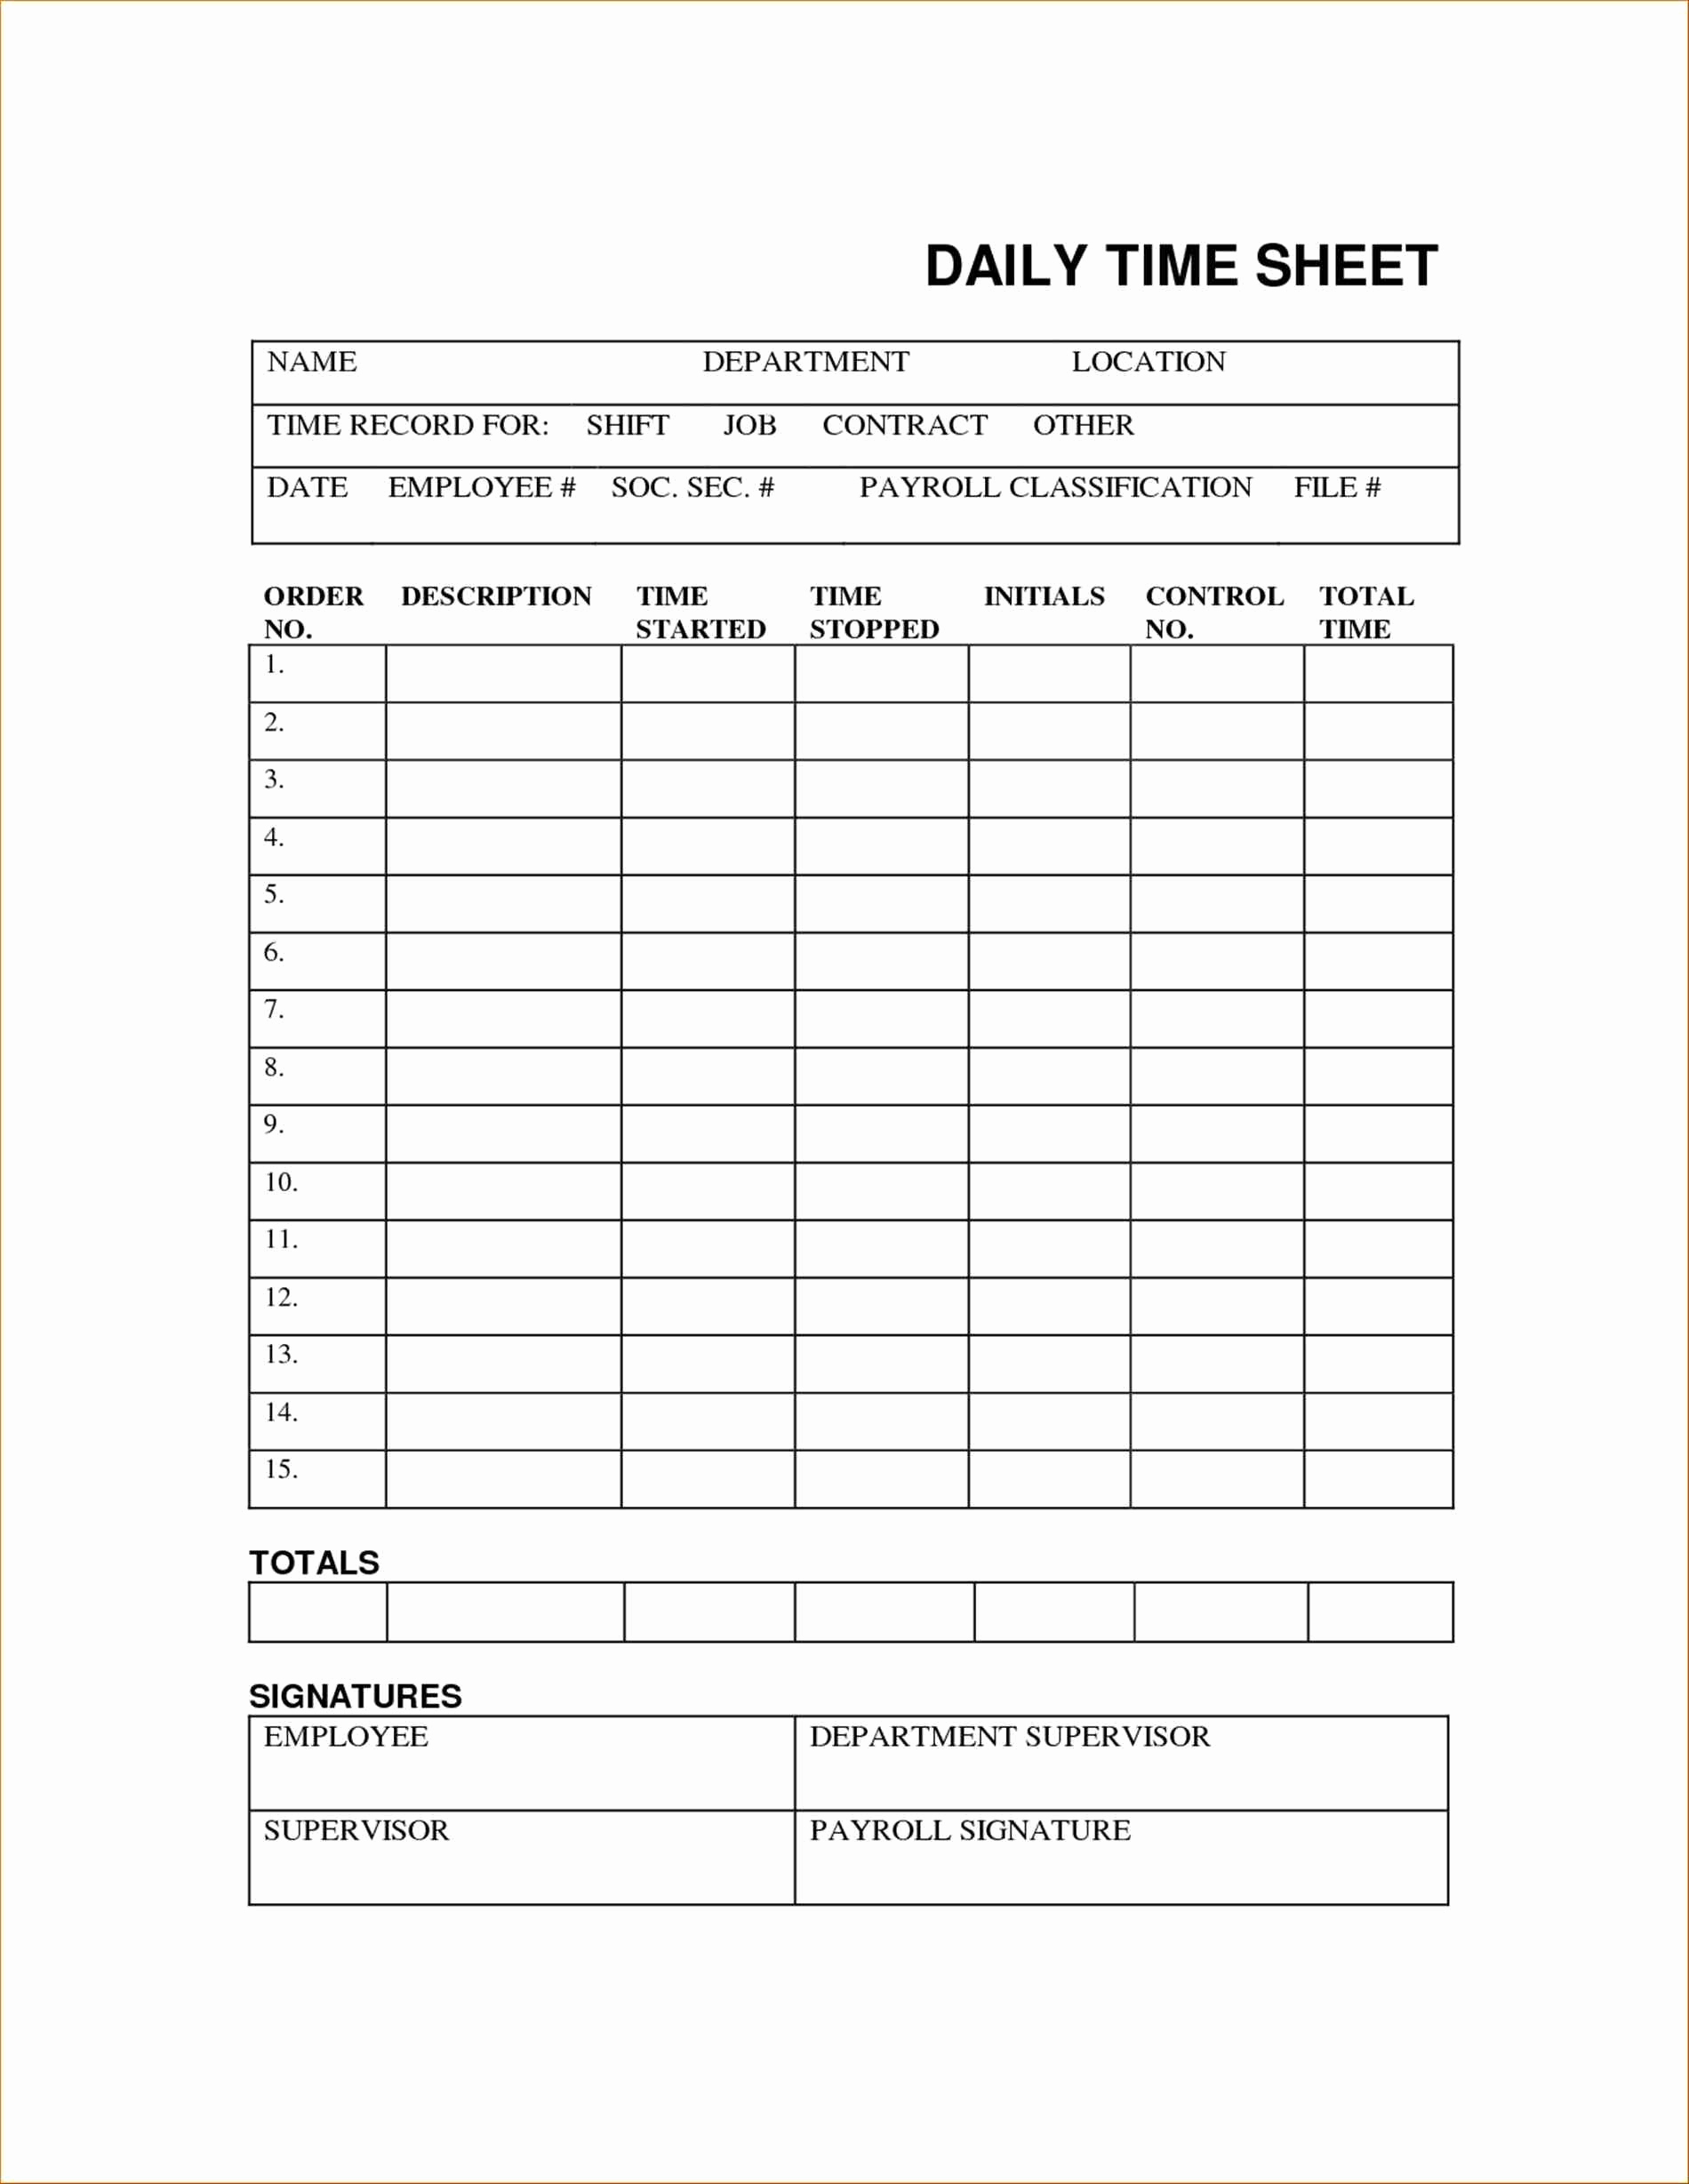 daily-timesheet-template-free-daily-timesheet-template